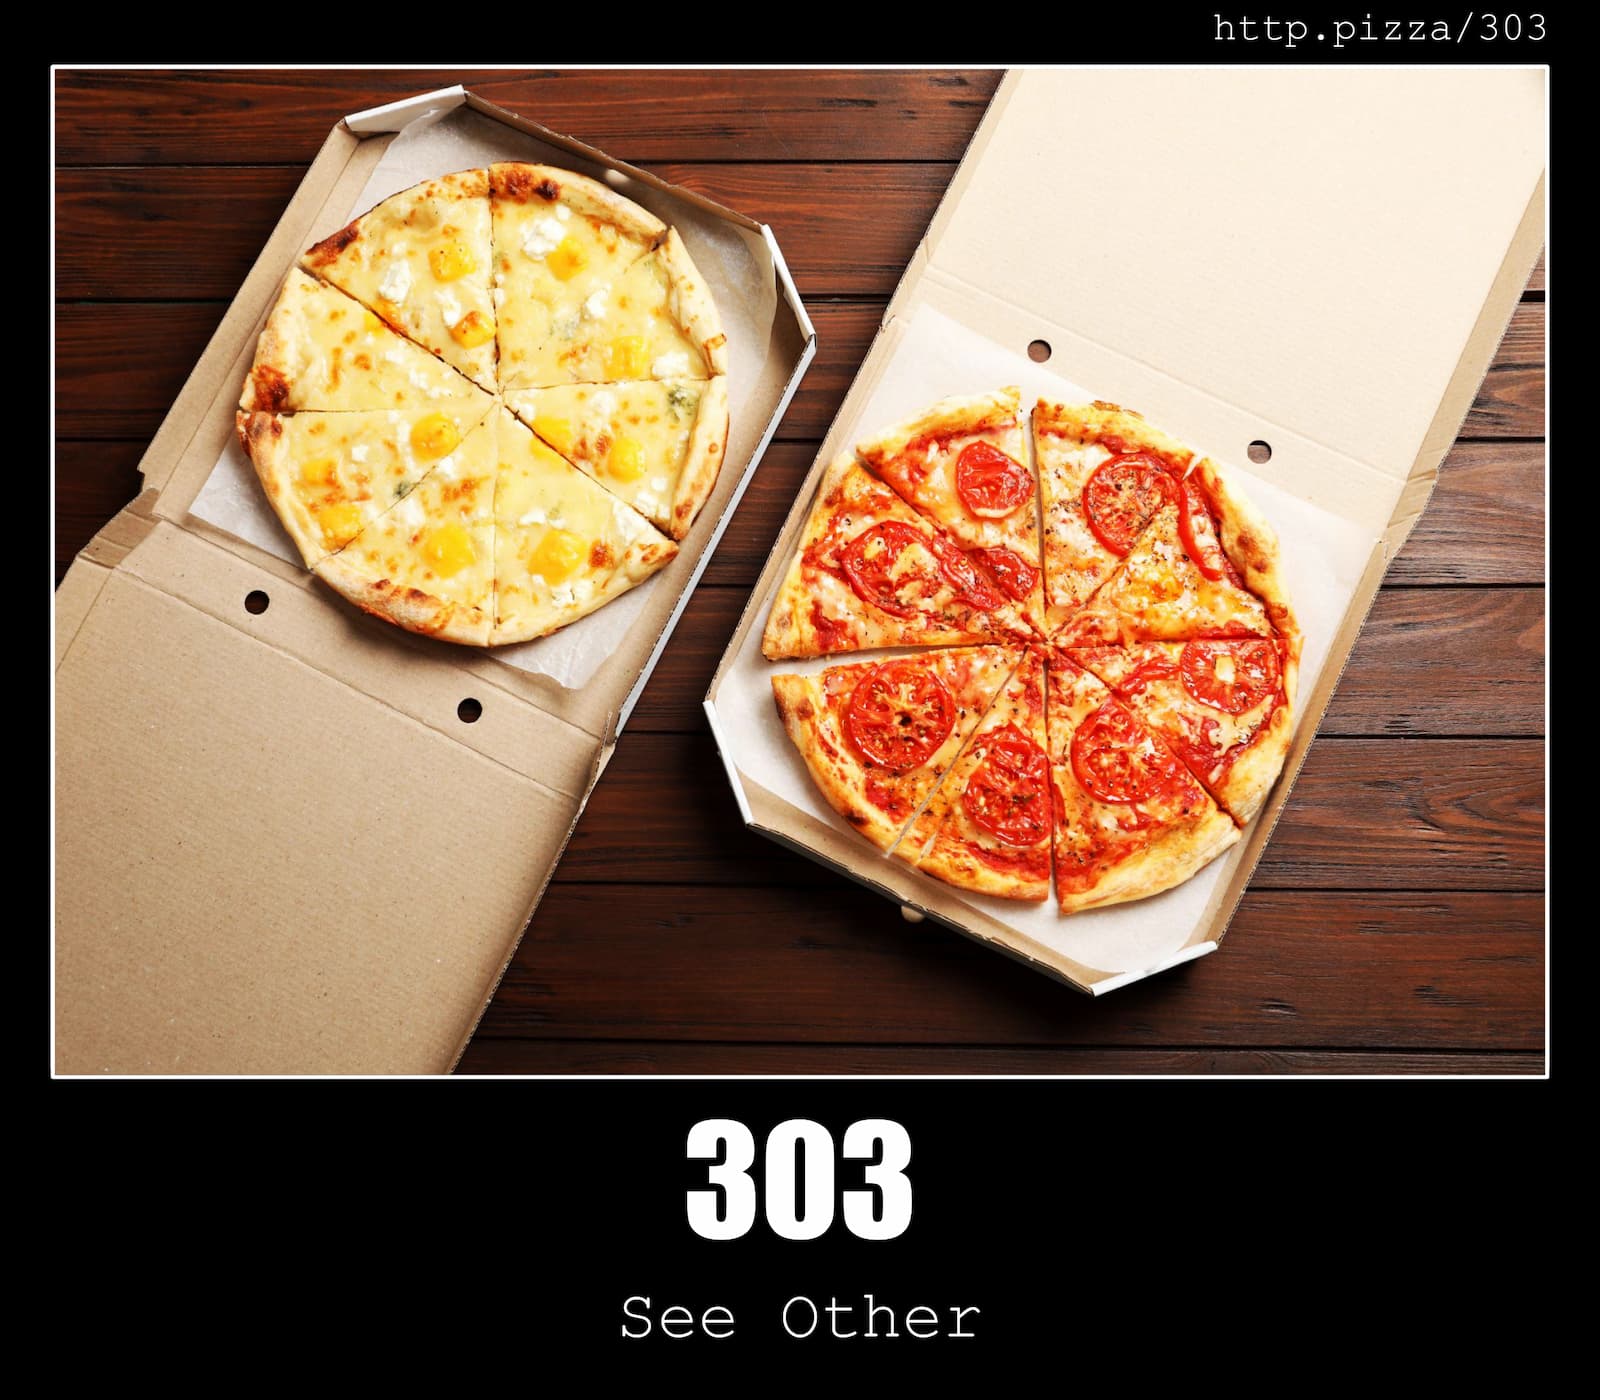 HTTP Status Code 303 See Other & Pizzas